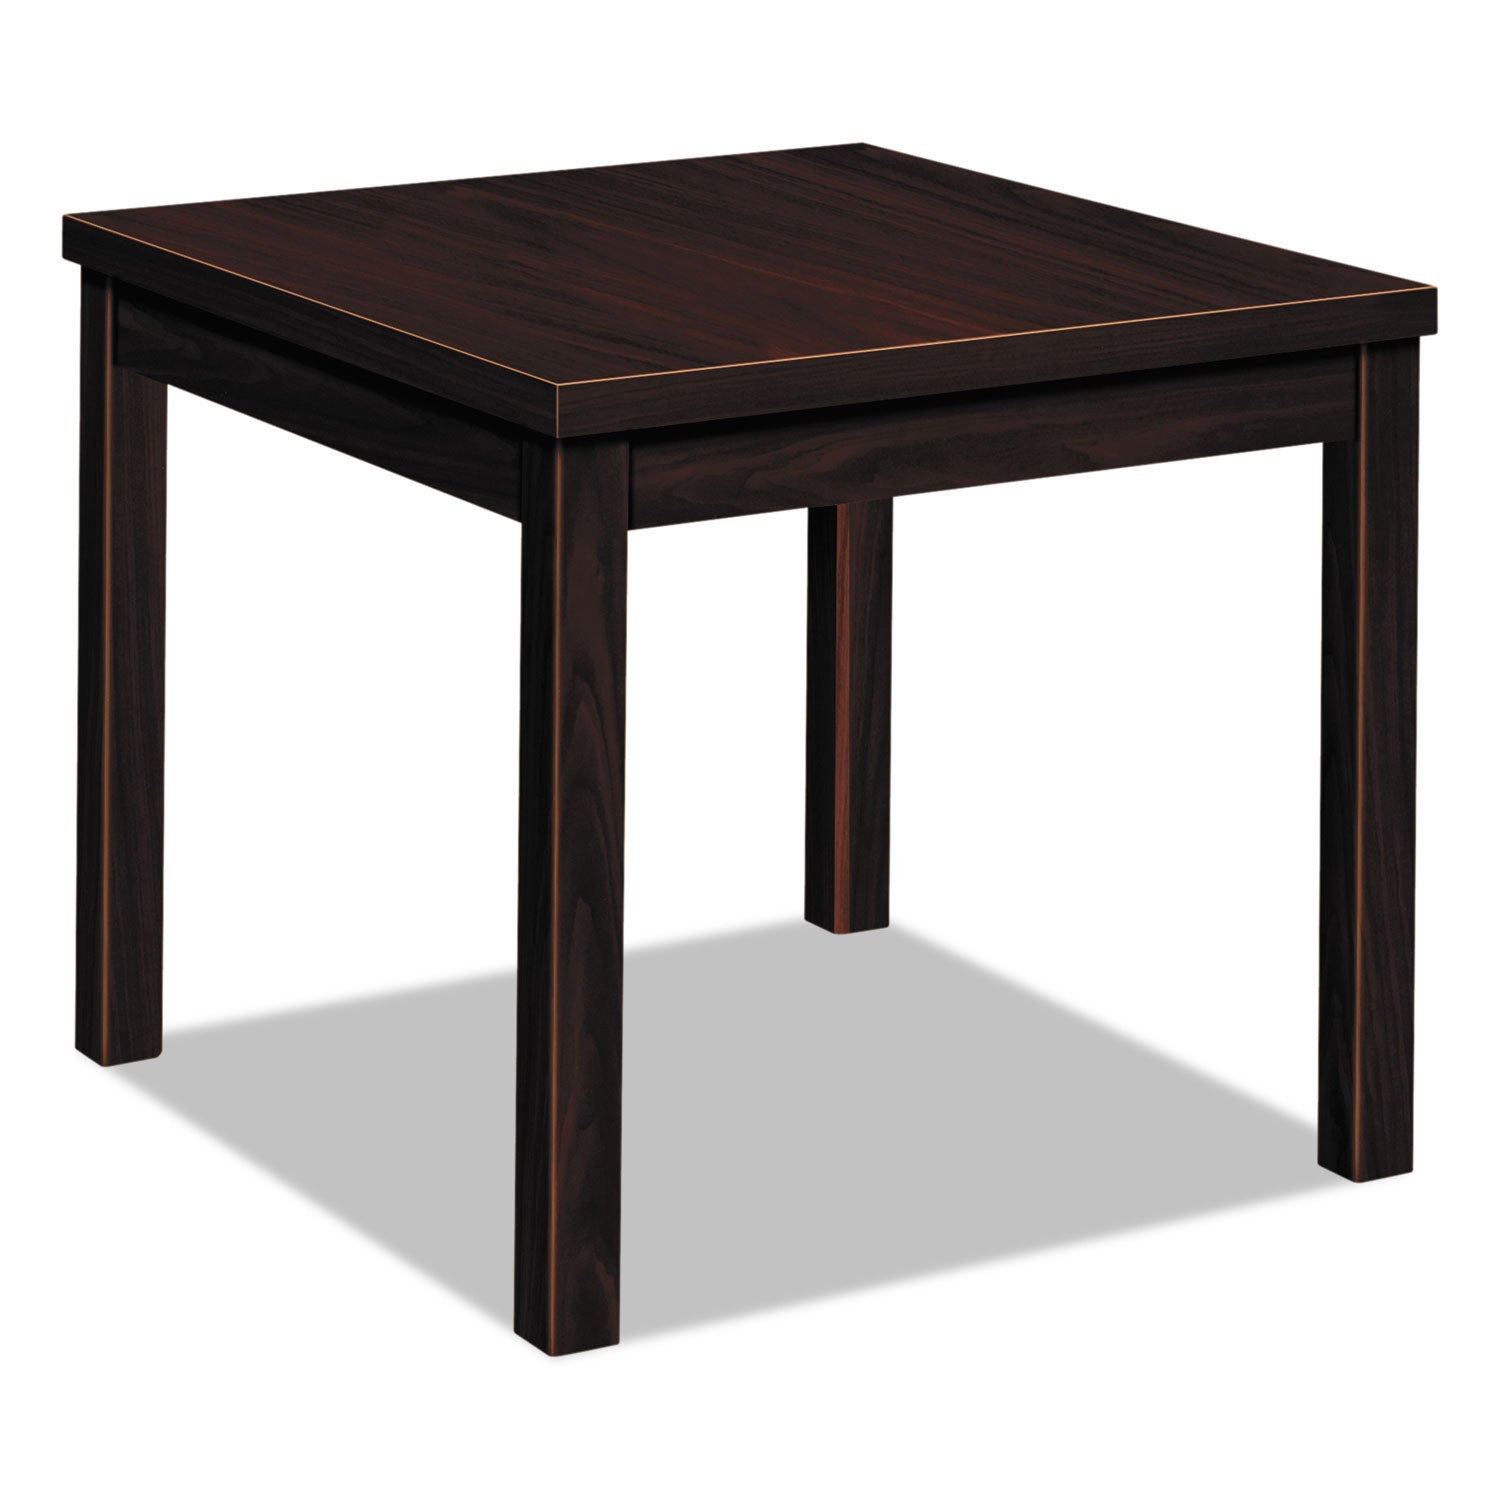 Laminate Occasional Table, Square, 24w x 24d x 20h, Mahogany - 